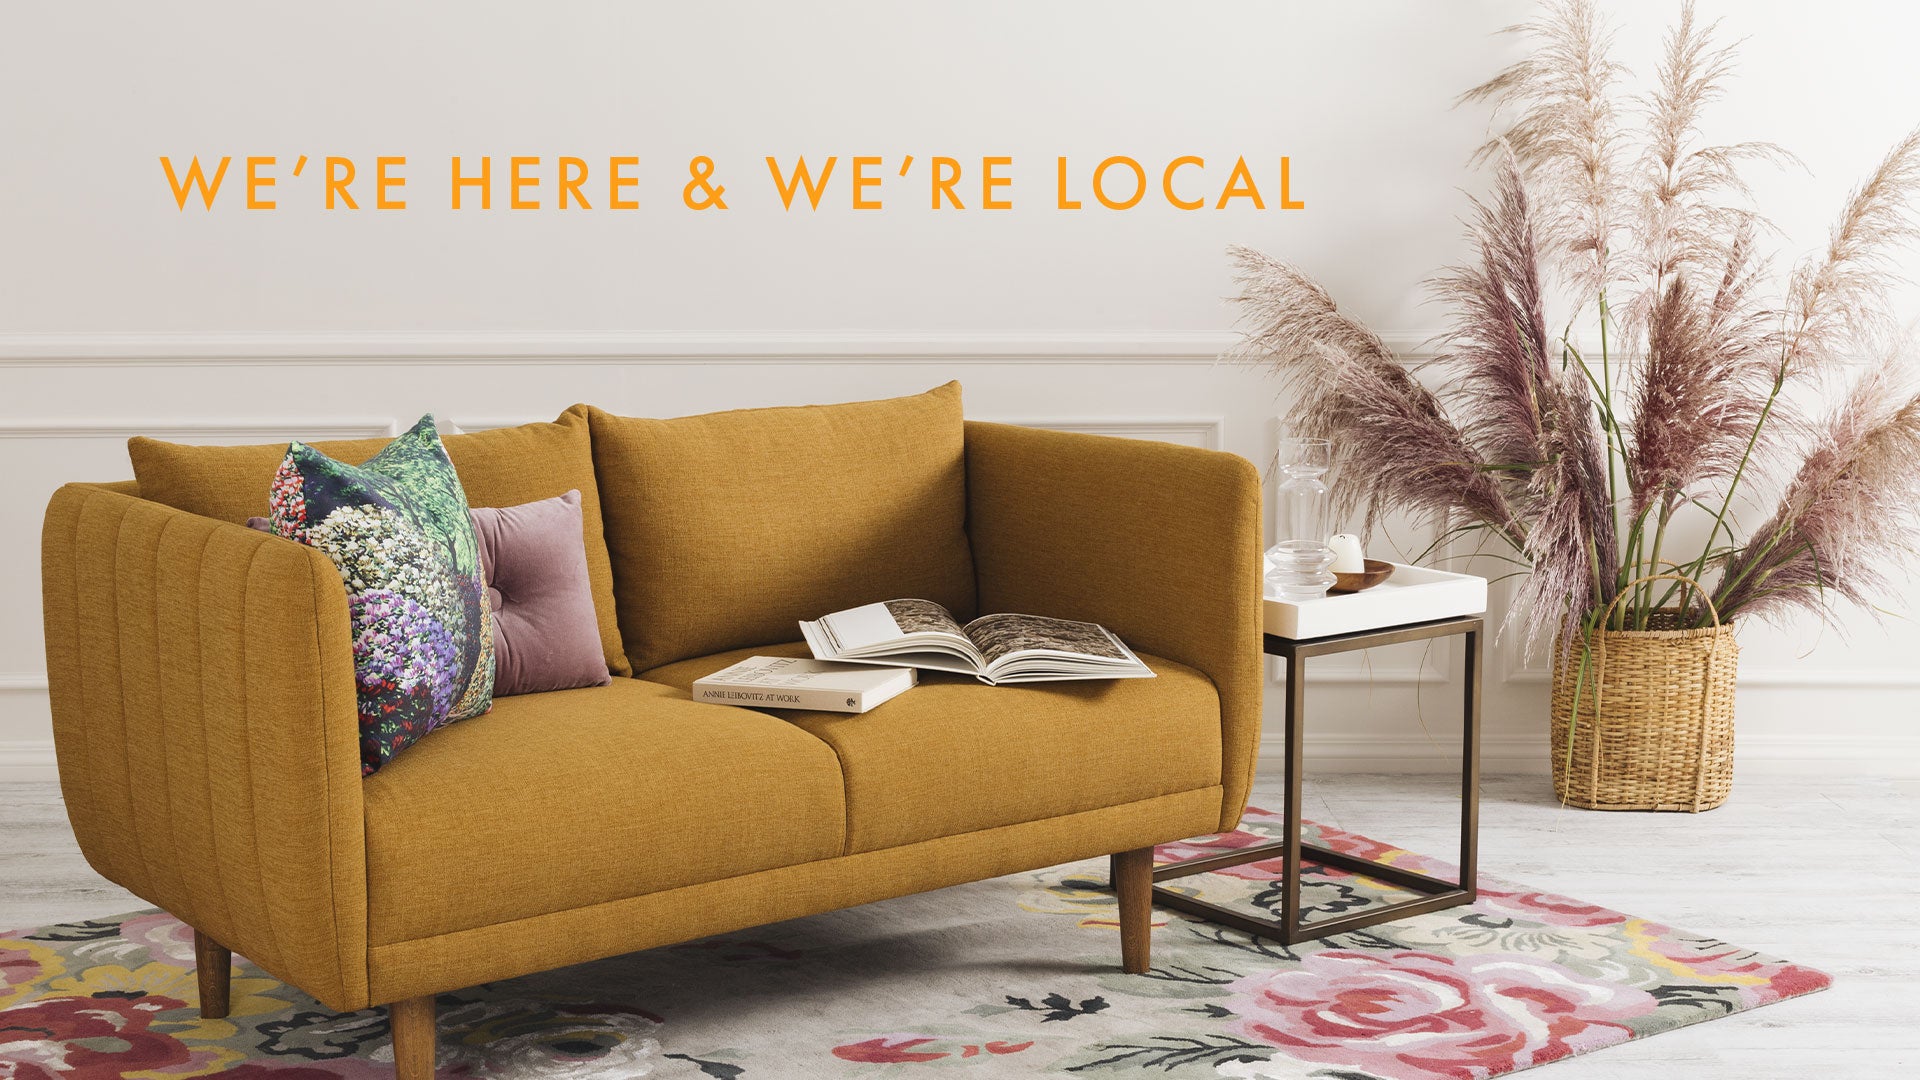 Affordable Furniture - We're here and we're local